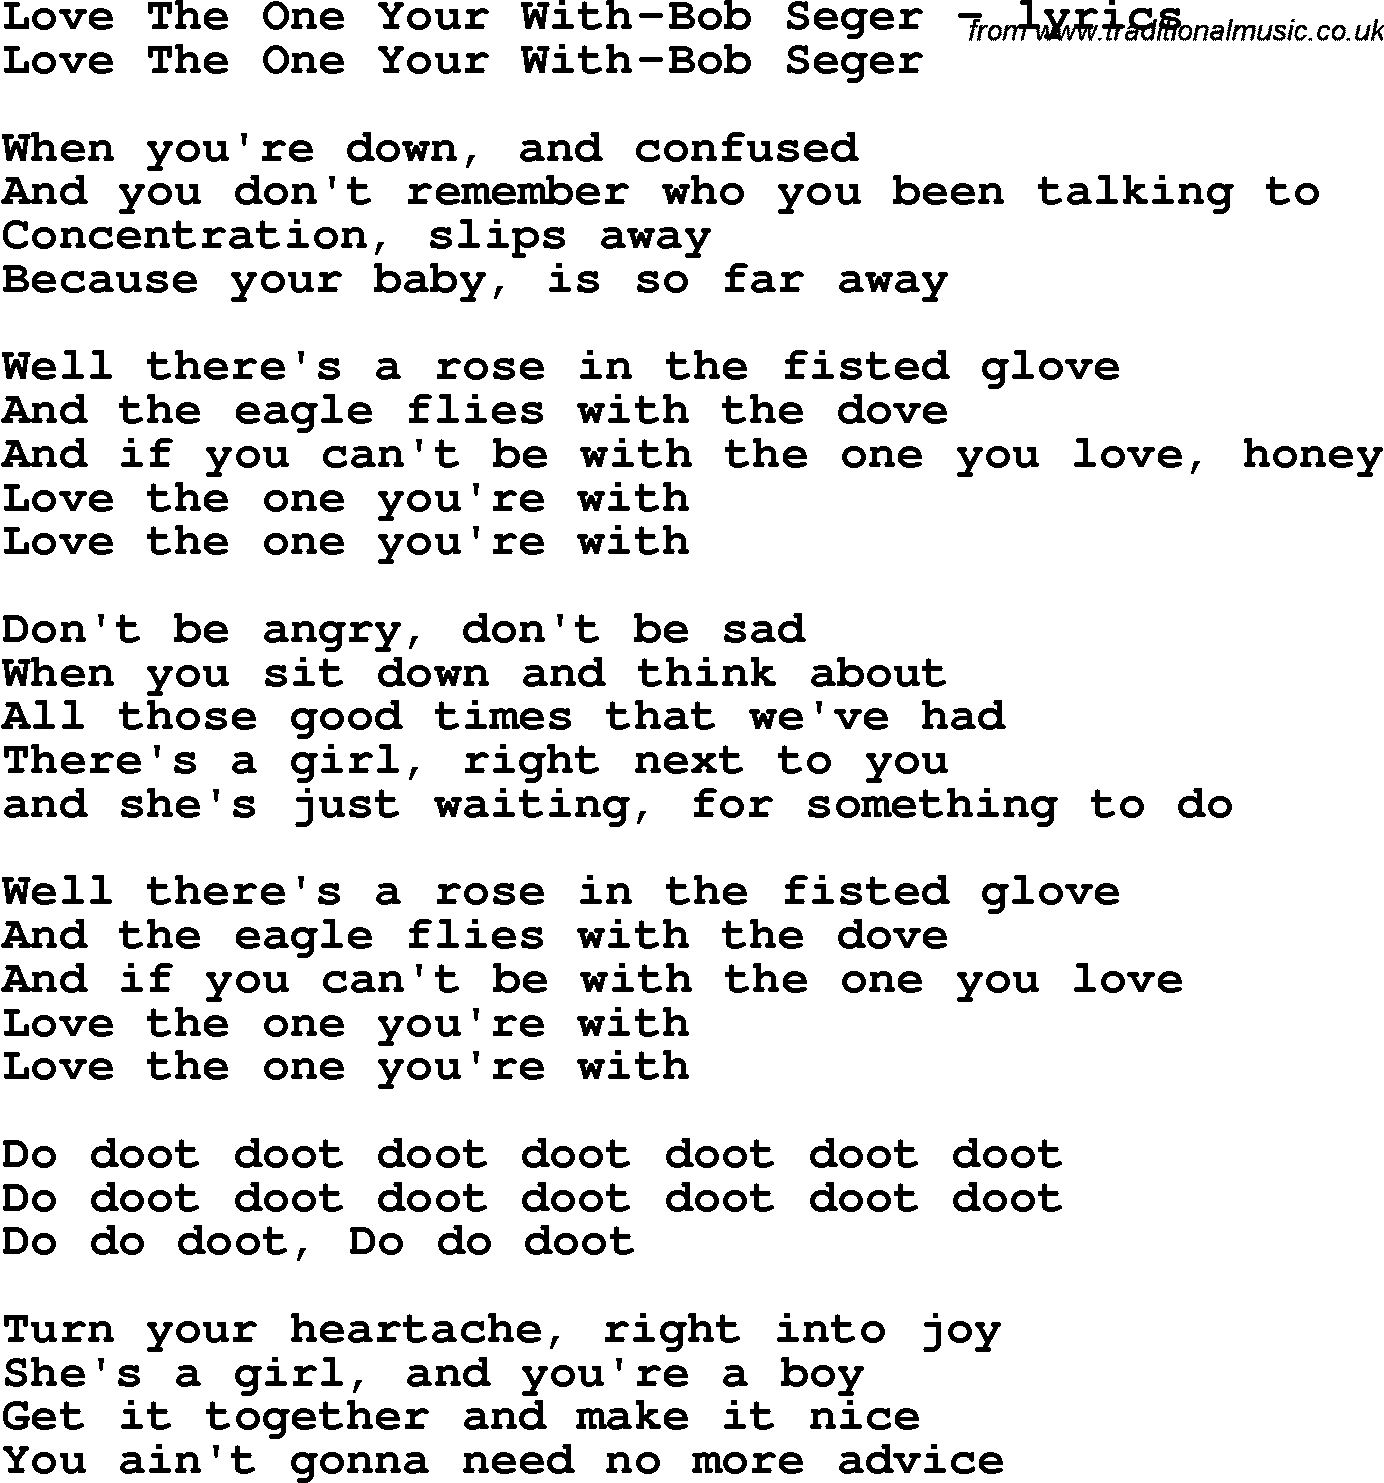 Love Song Lyrics for: Love The One Your With-Bob Seger